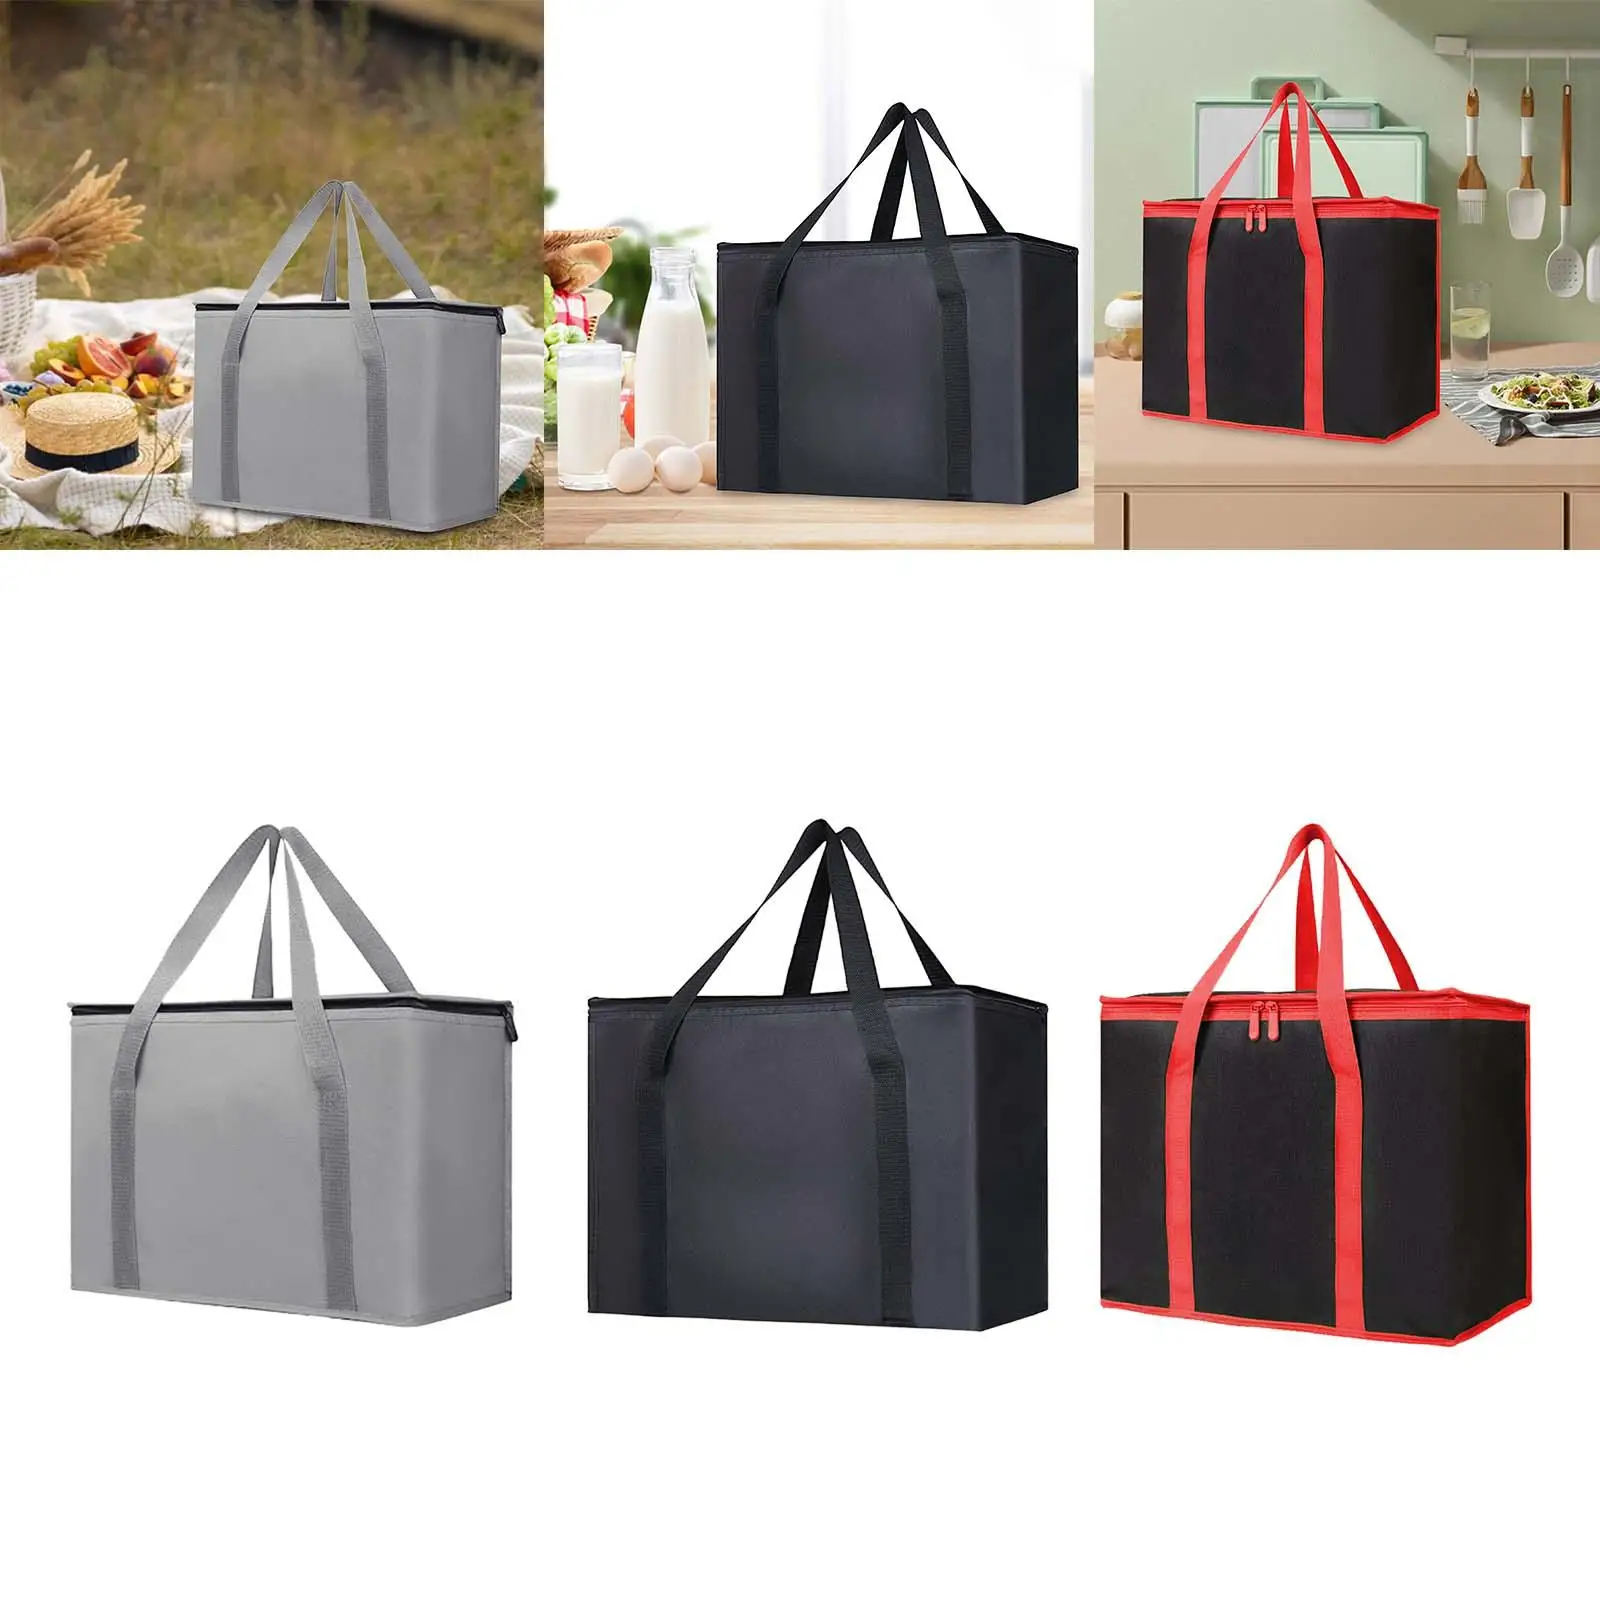 Insulated Cooler Bag Thermal Non Woven Zipper Grocery Shopping Bag Insulated Bag for Festivals Office Outdoor Beach Picnic